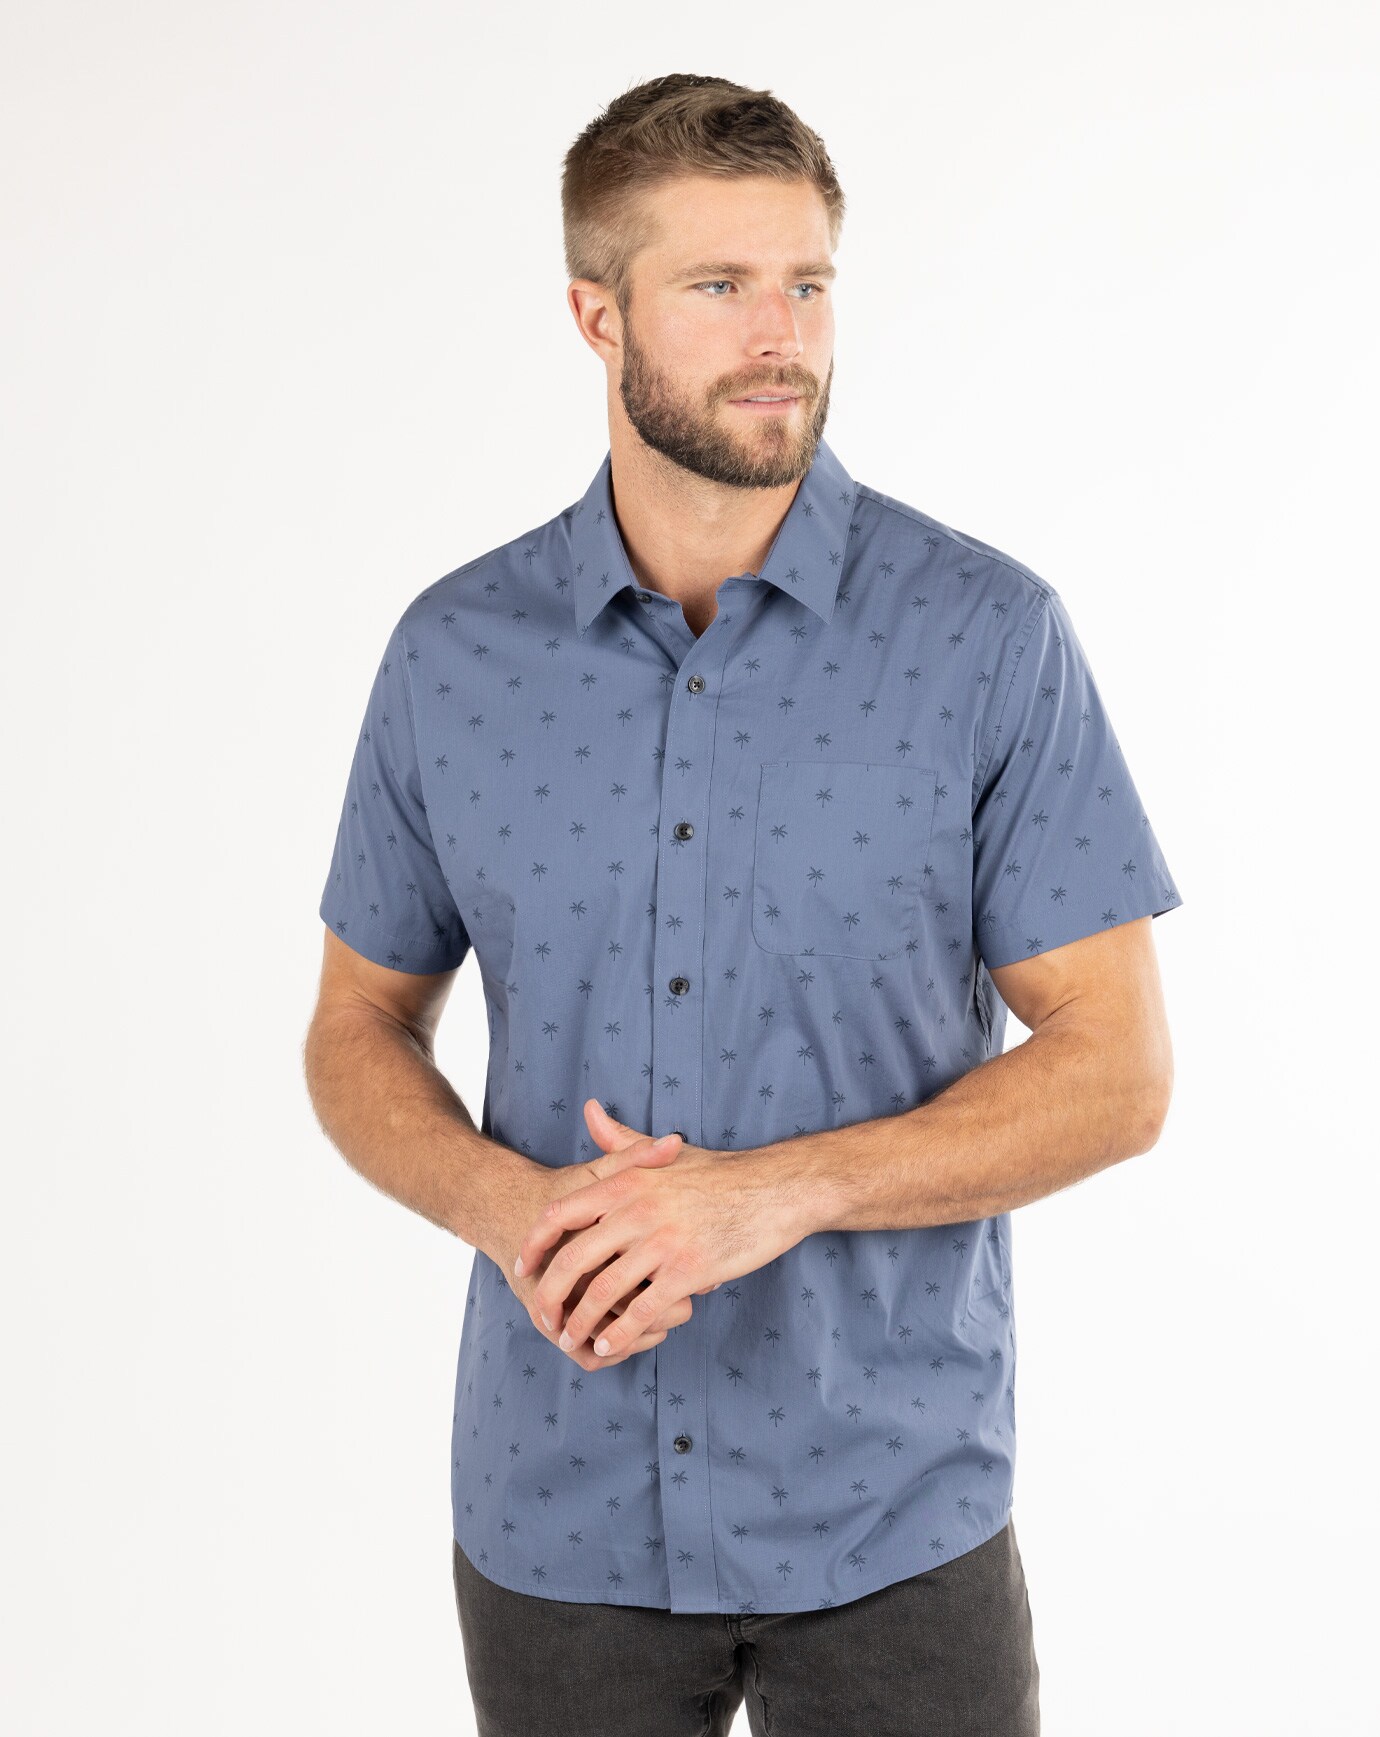 GOOD DISTRACTION BUTTON-UP Image 1